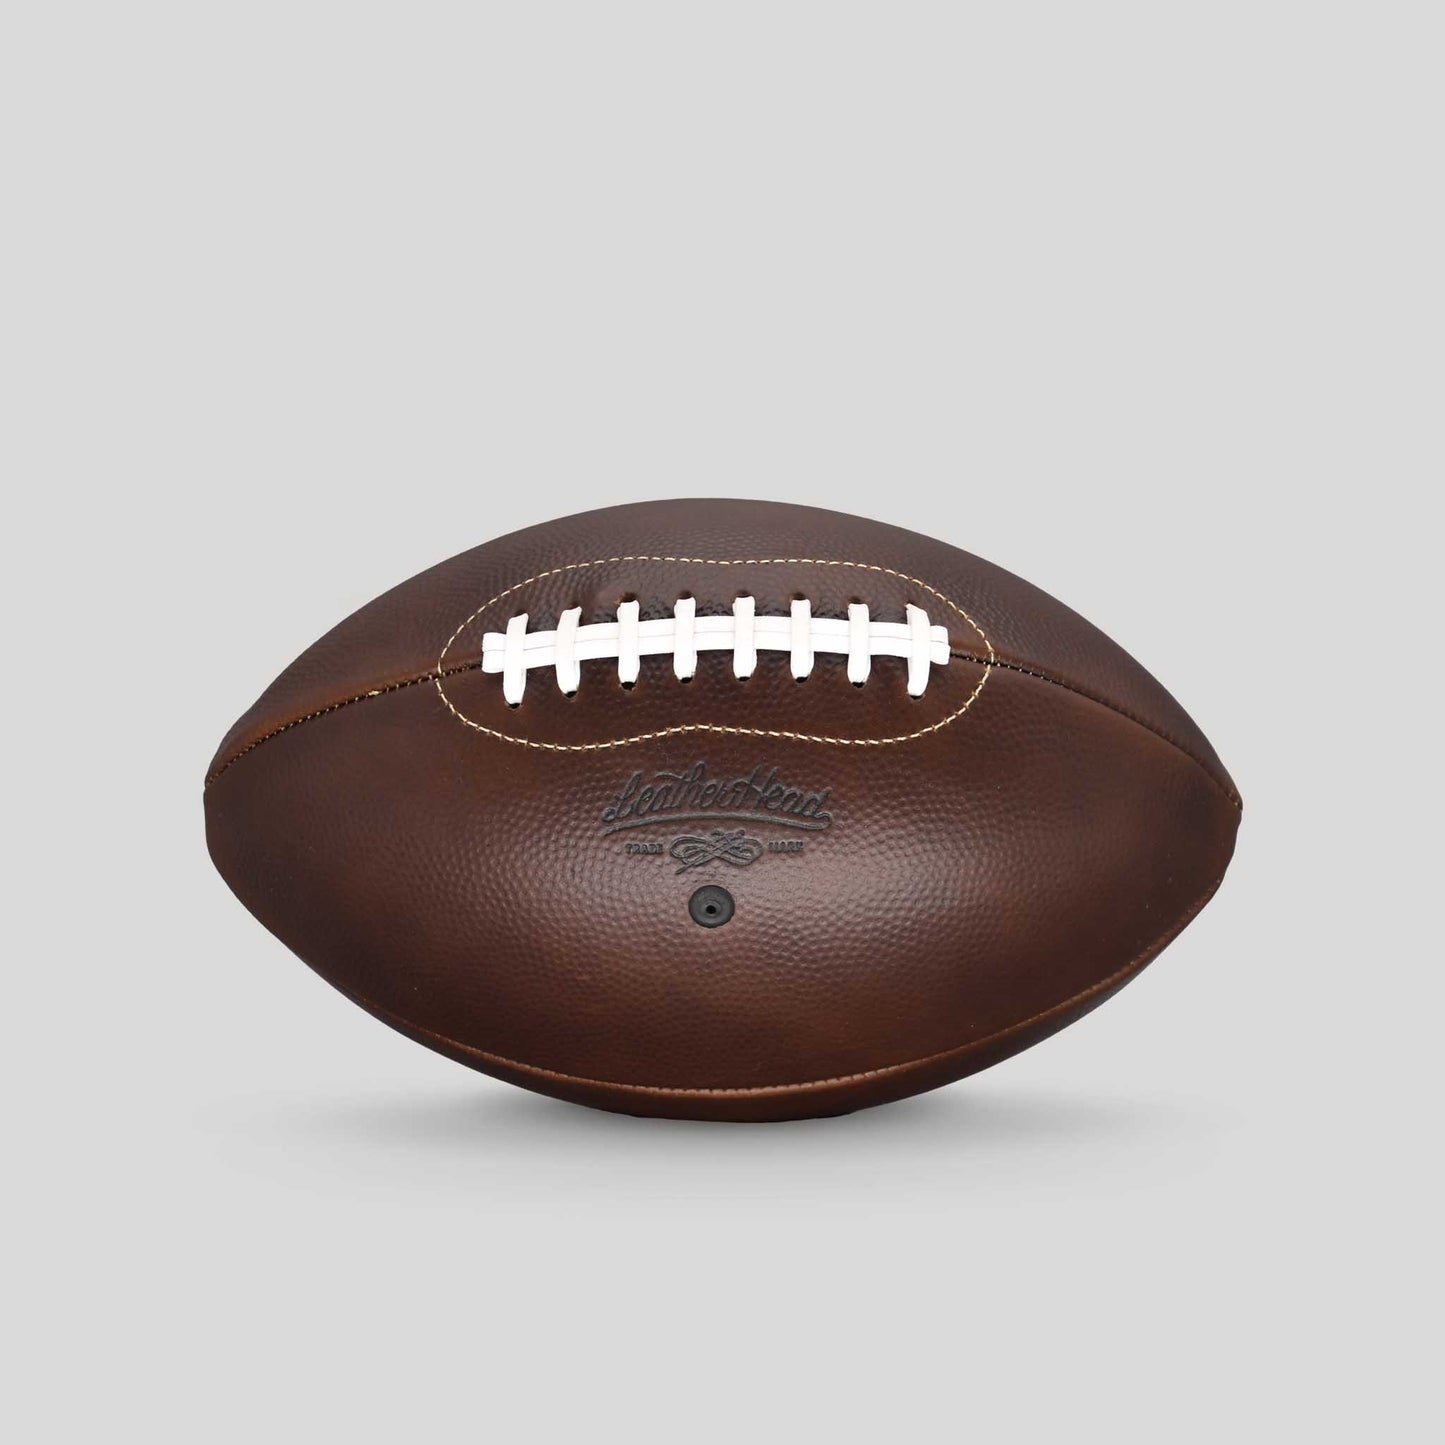 Limited Release: Brown Horween Golf Ball Print Football